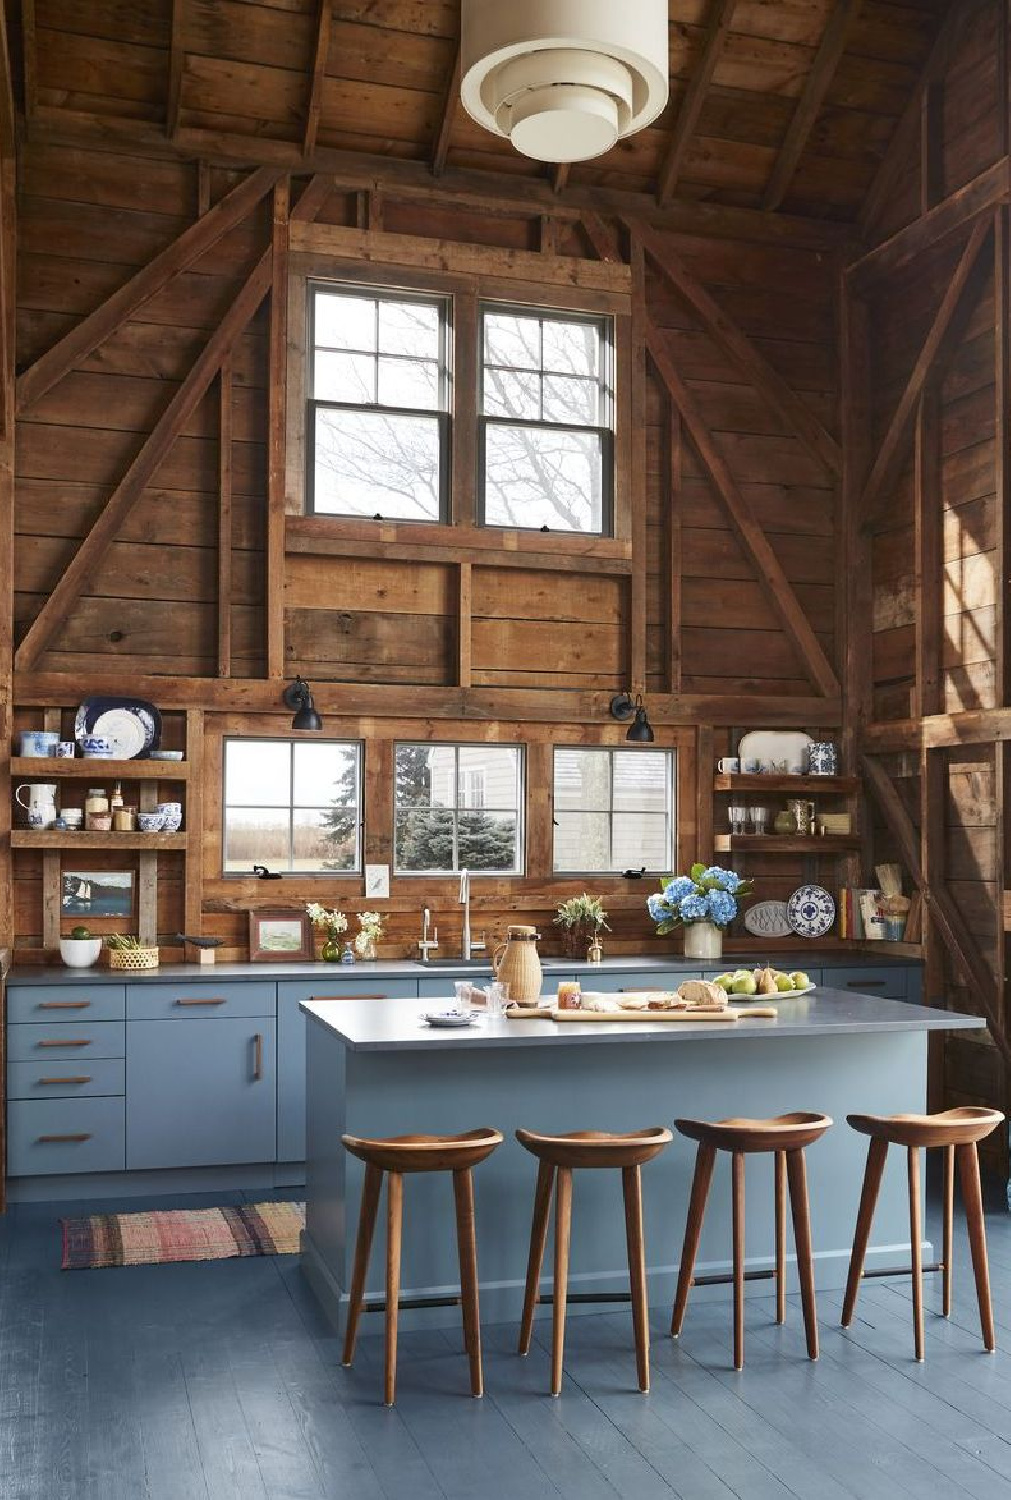 Rustic country blue kitchen (cabinets painted BM French Toile) designed by Hadley Wiggins (photo by David A. Land). #bluekitchens #rustickitchens